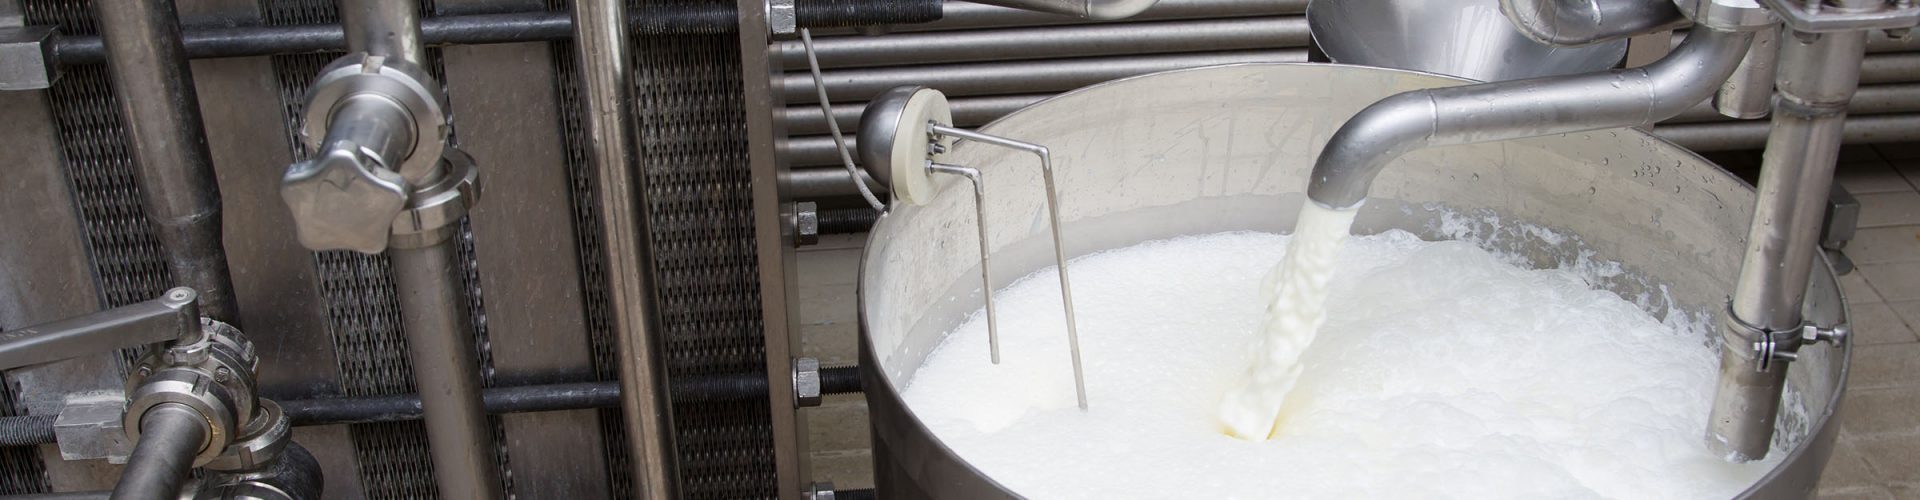 Milk being poured into a metal container in the milk processing process